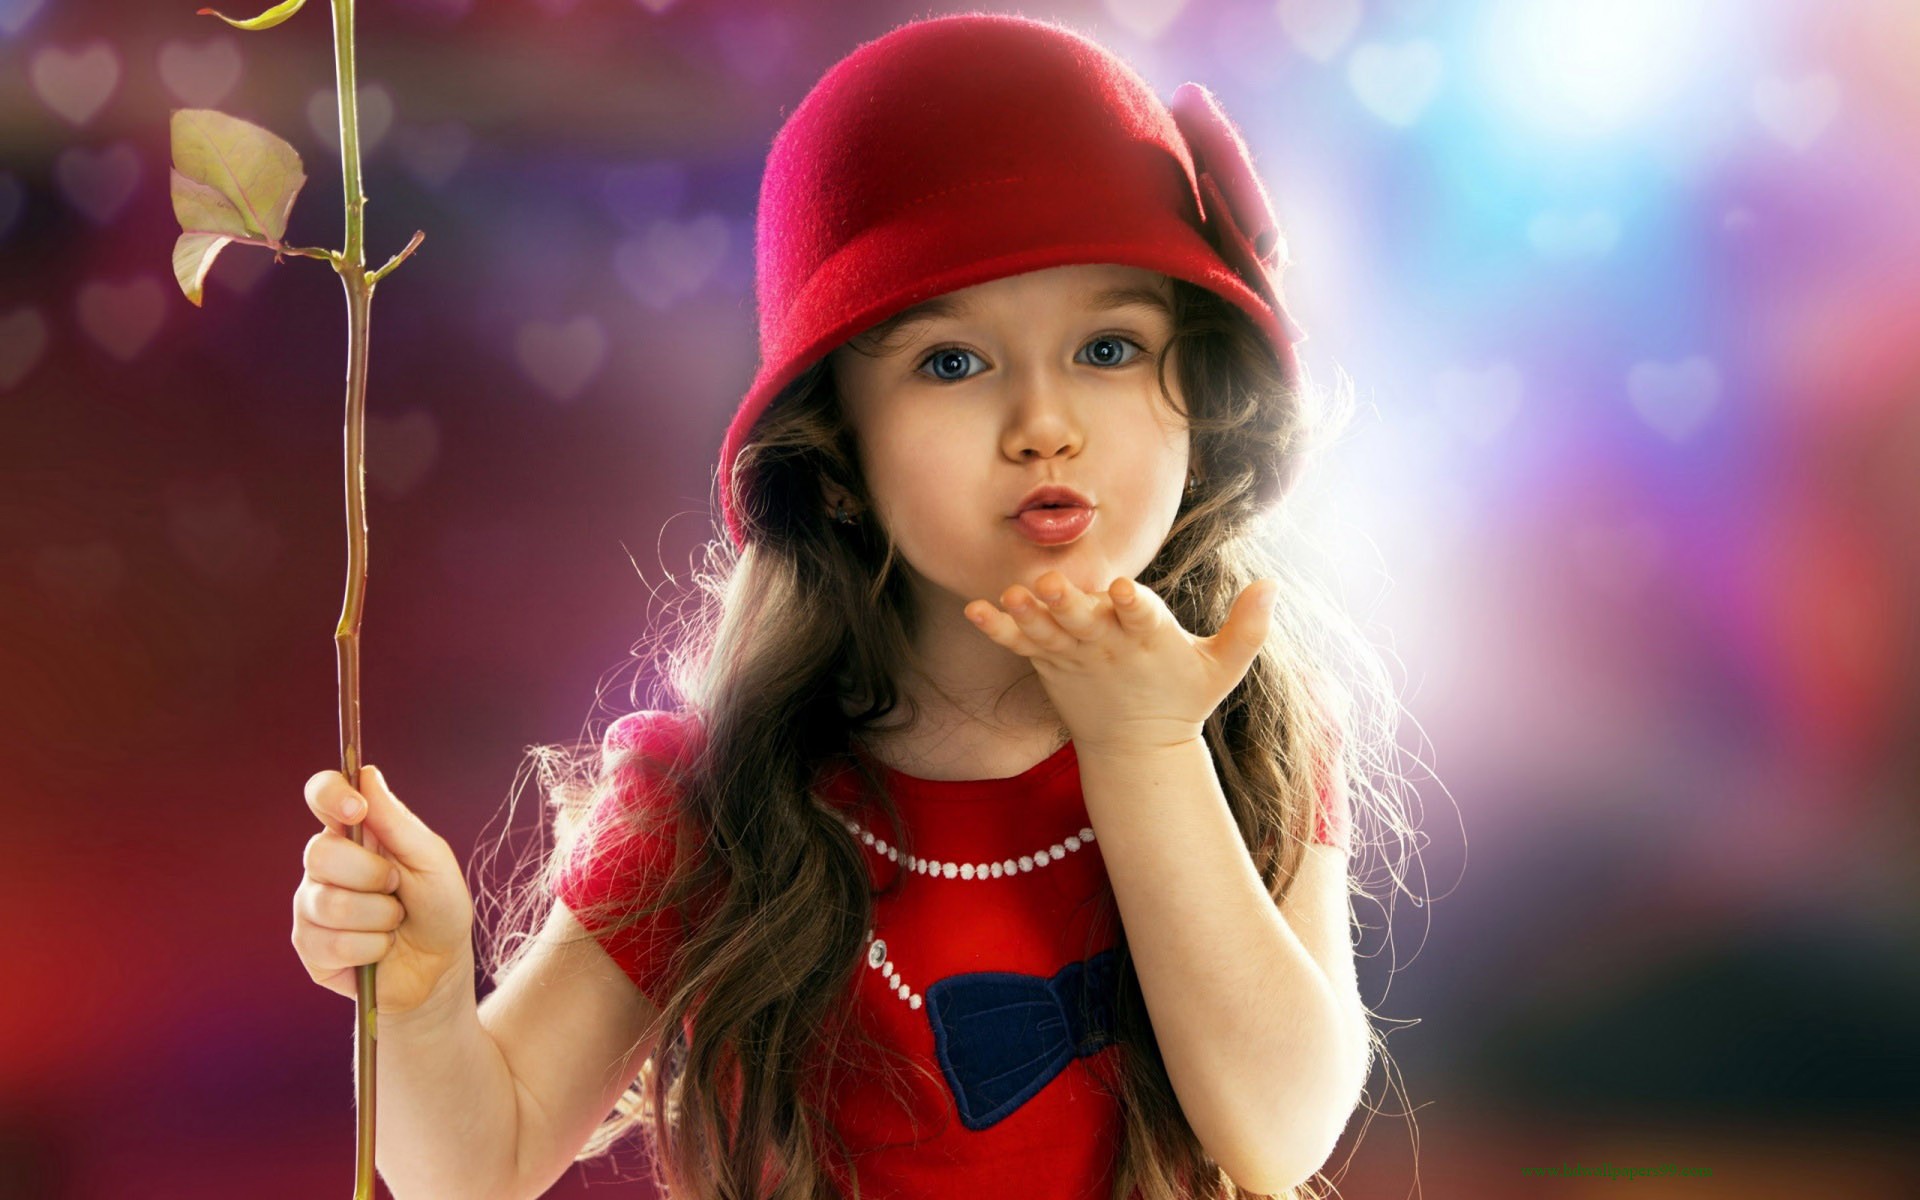 cute little girl free awesome image for mobile